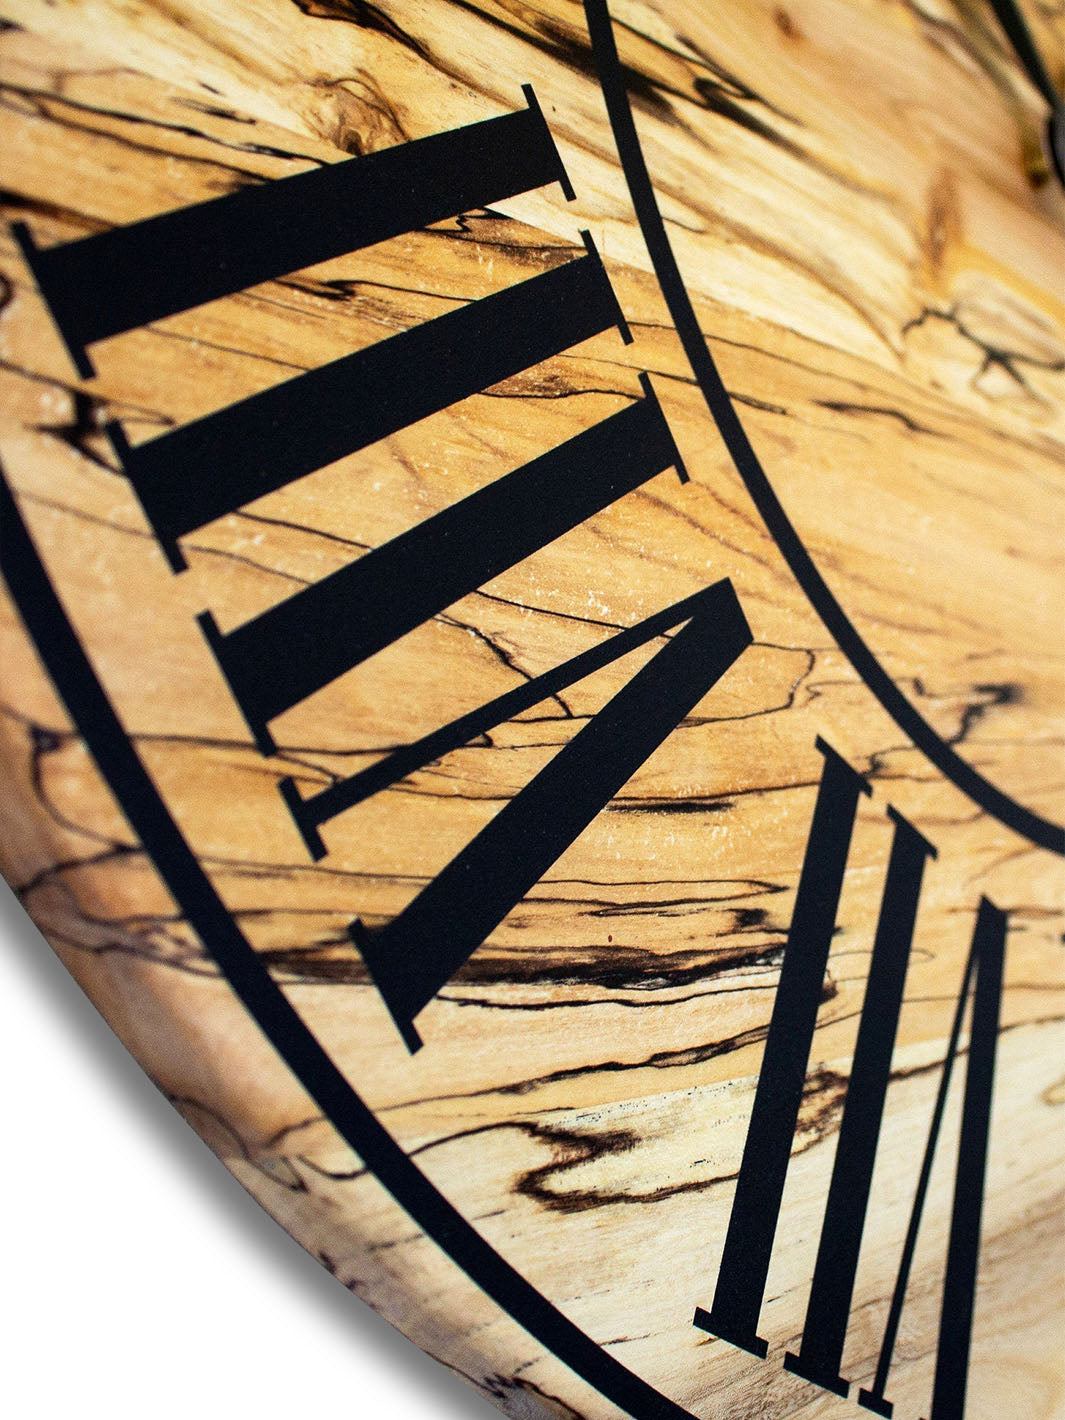 Solid Spalted Maple Wall Clock with Black Lines and Roman Numerals Earthly Comfort Clocks 547-1